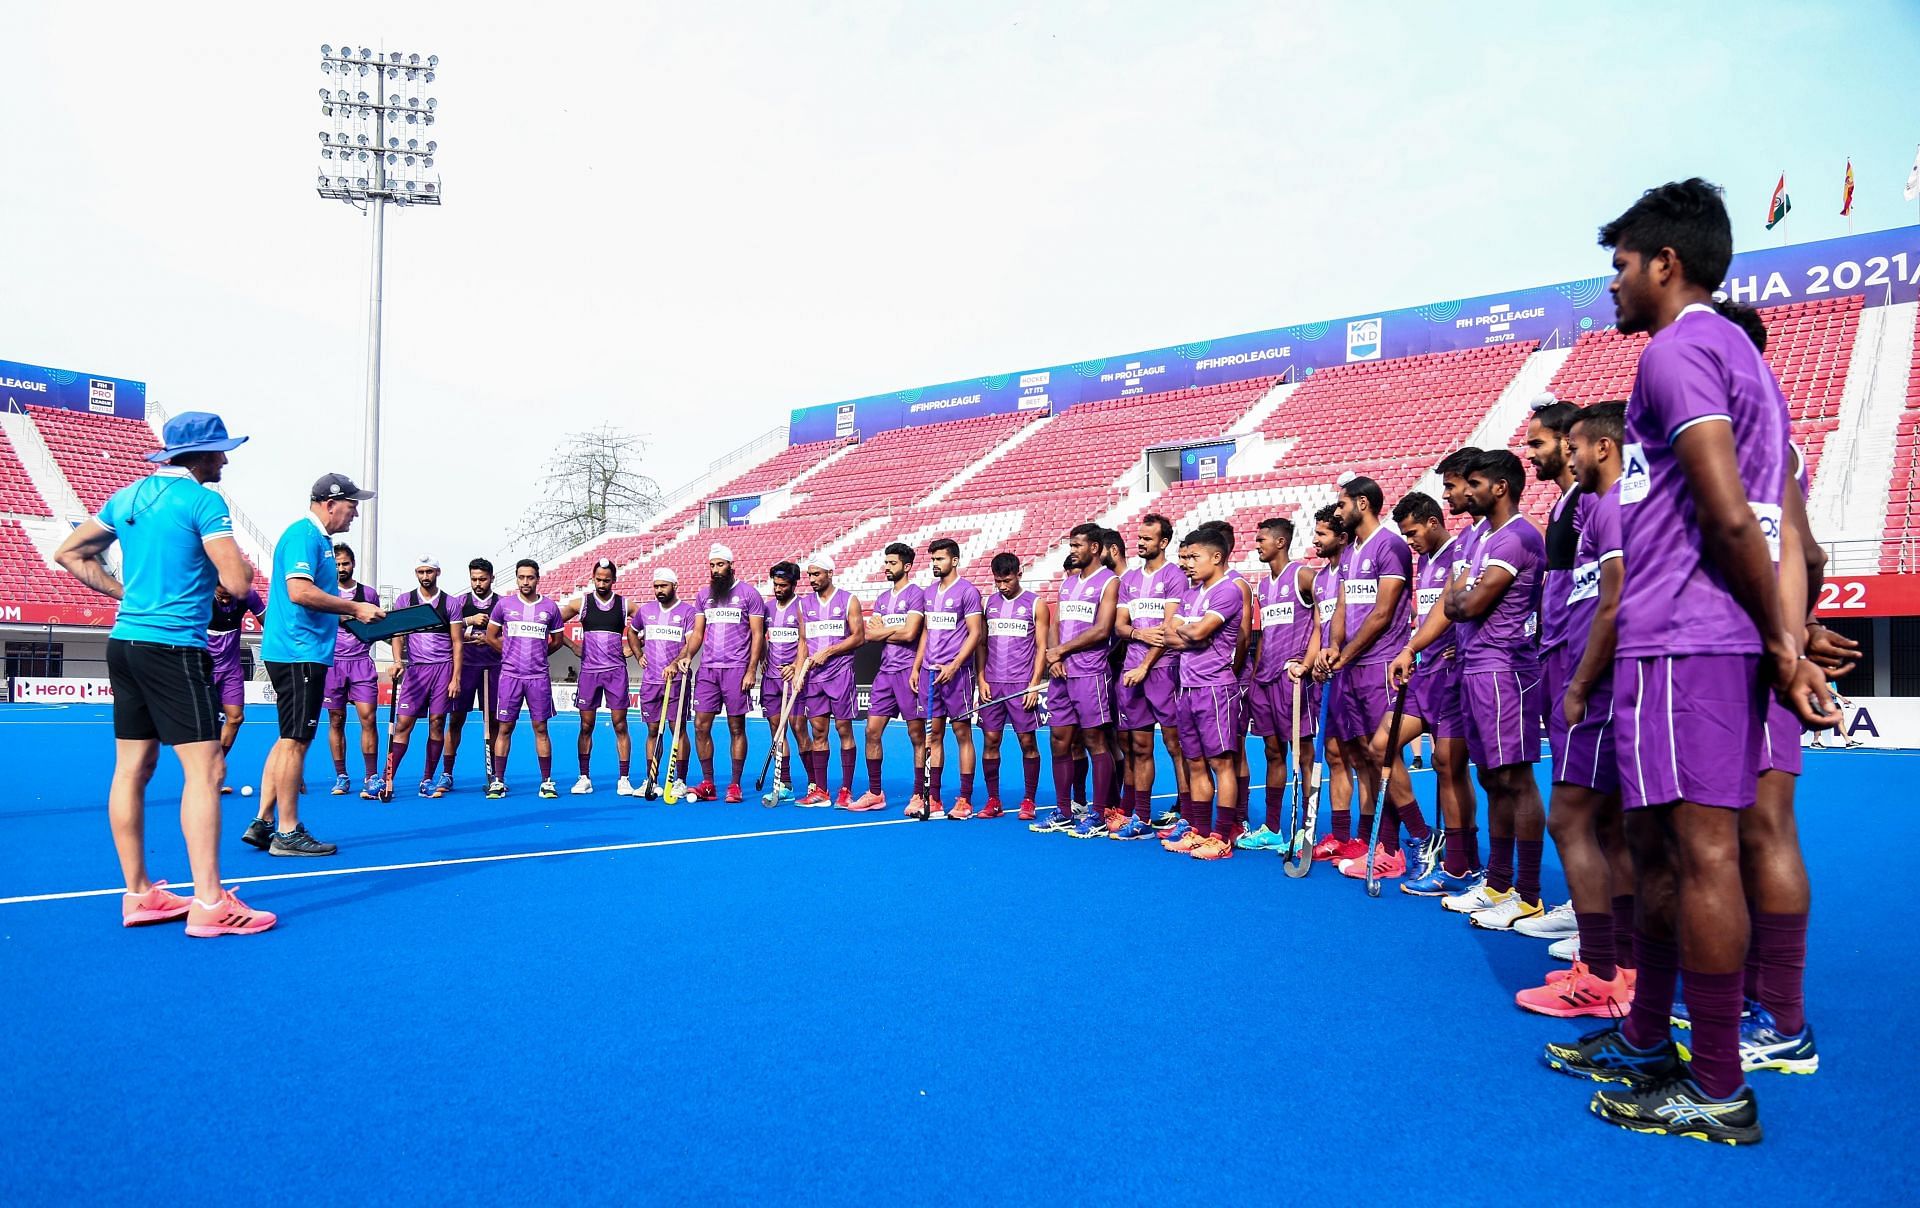 The Indian team during a training session ahead of their FIH Pro League match against Argentina. (PC: HI)